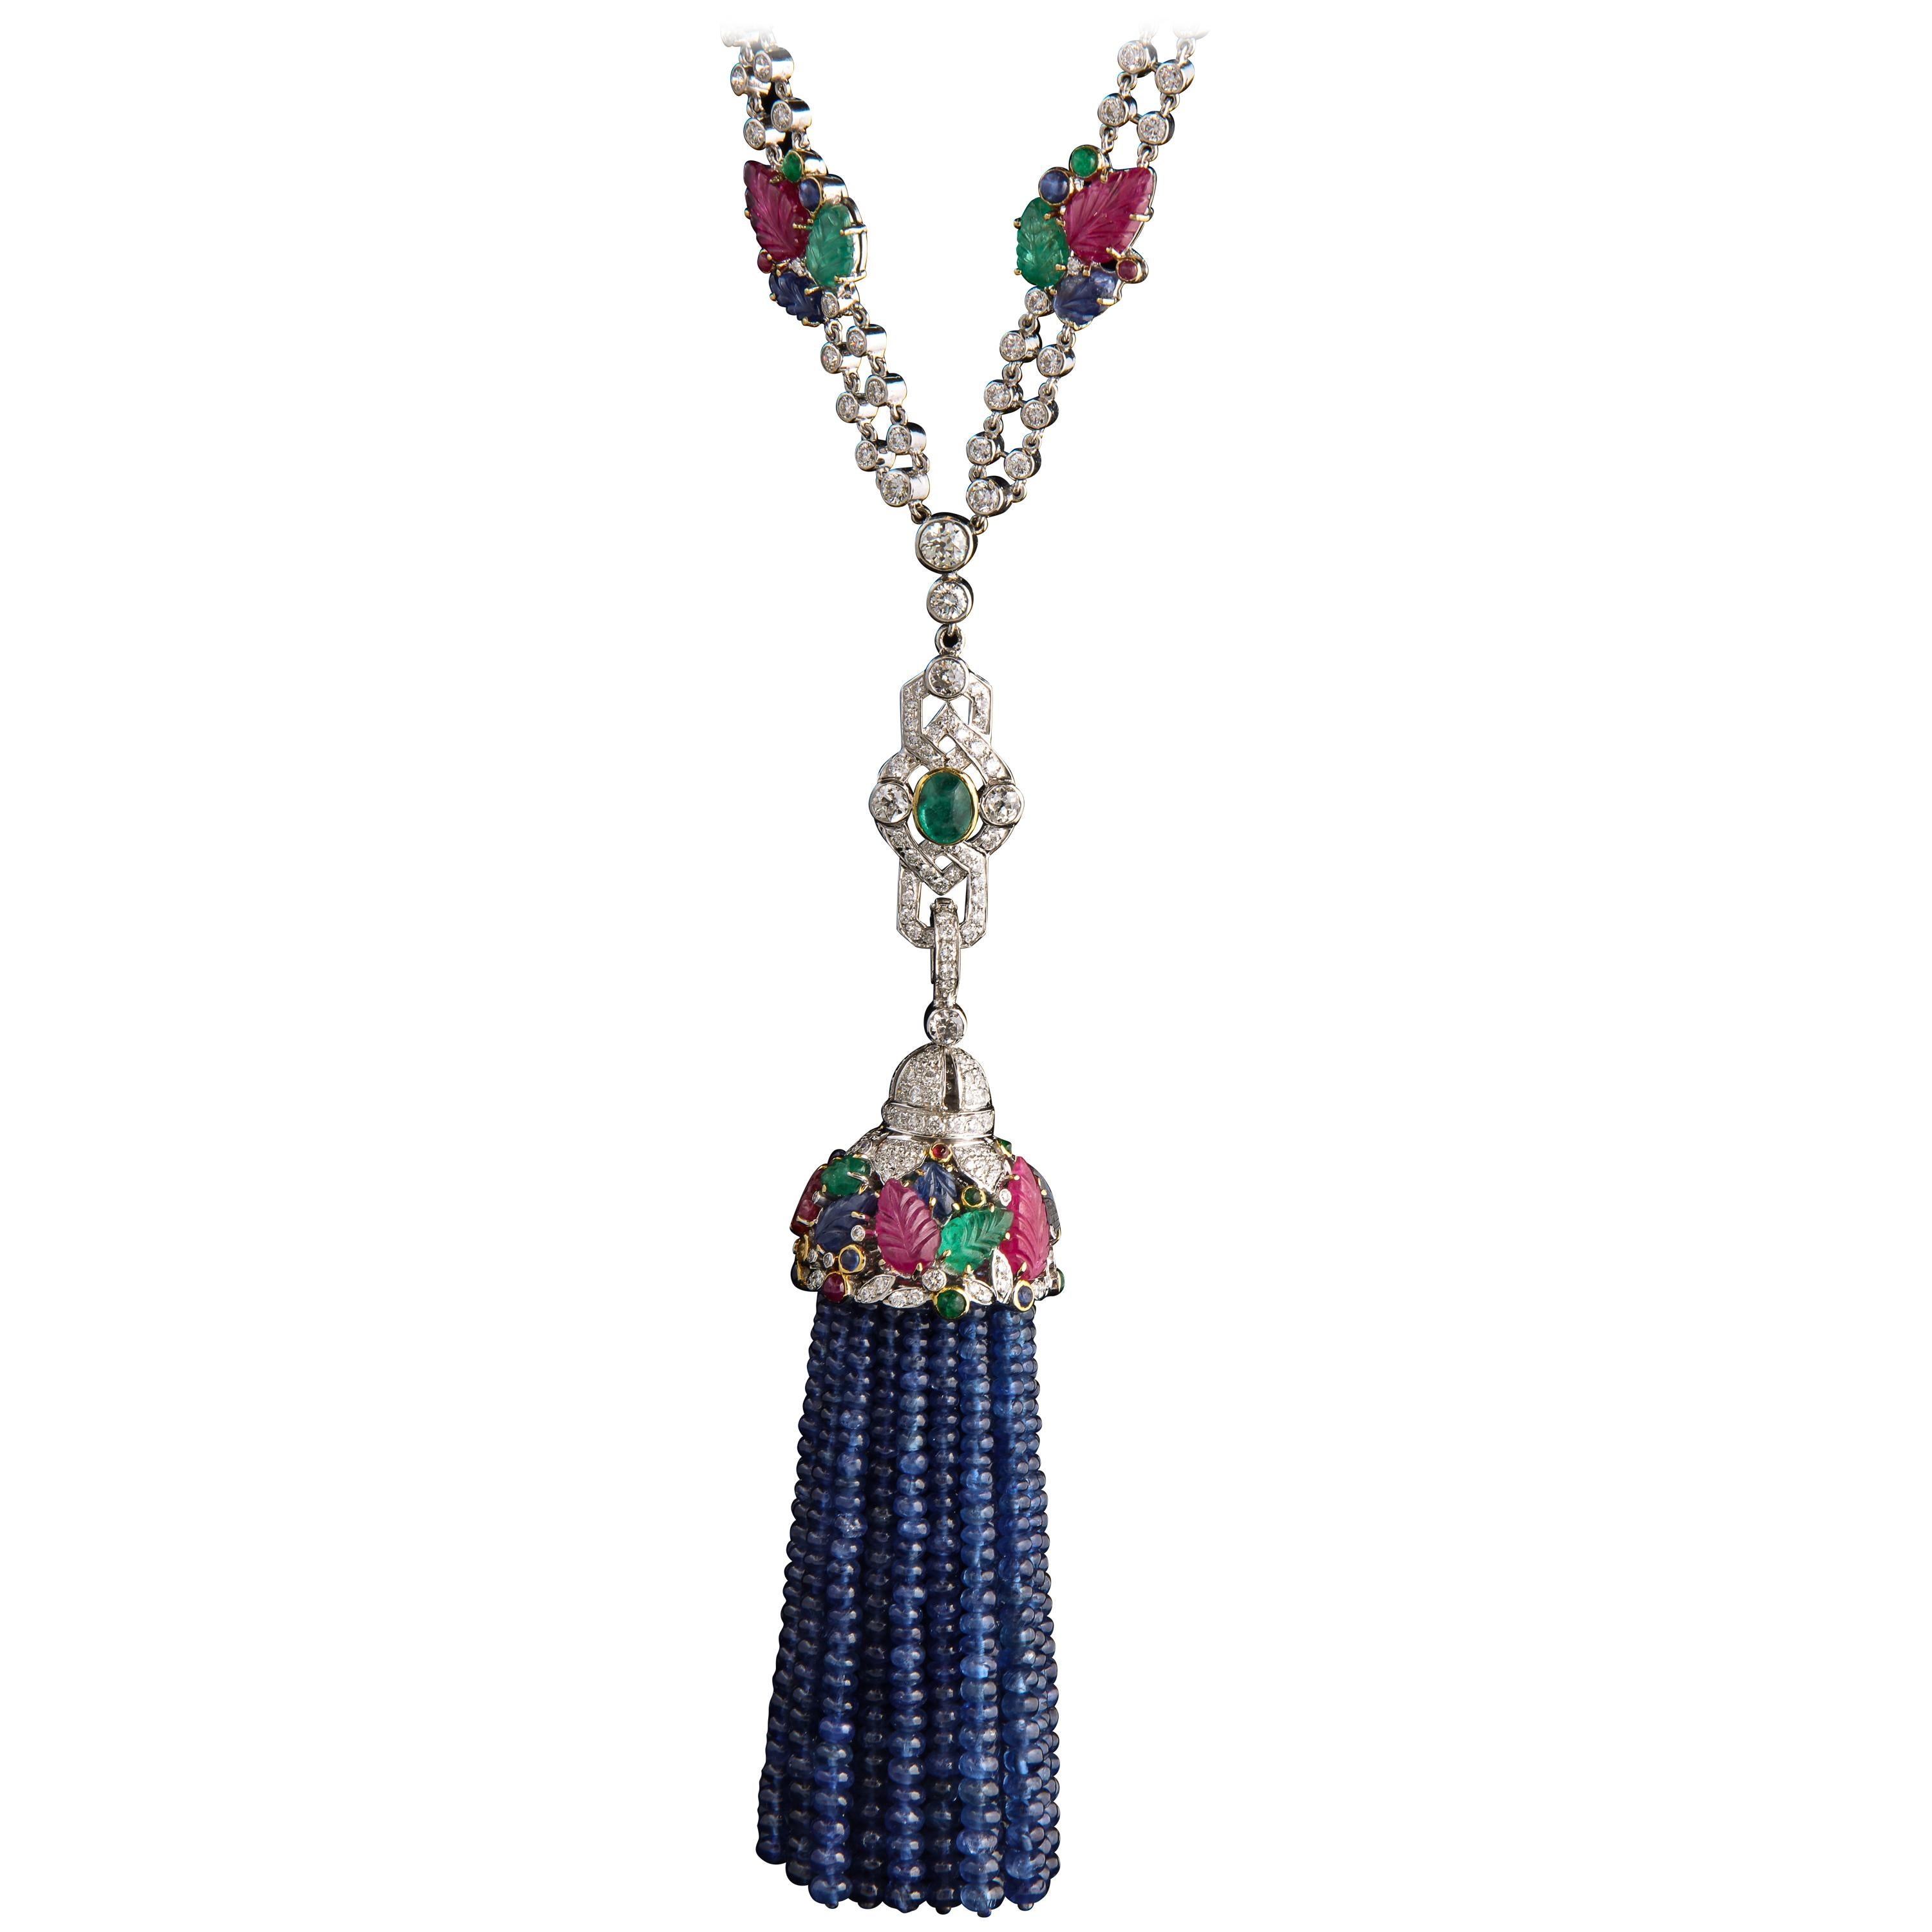 Tutti Frutti Sautoir length Tassel Necklace

Tassel is detachable

Length with the tassel is approx 38 inches

Diamonds approx 7.49 Cts.
Emerald  approx 16.95 Cts.
Sapphire approx 437.25 Cts.